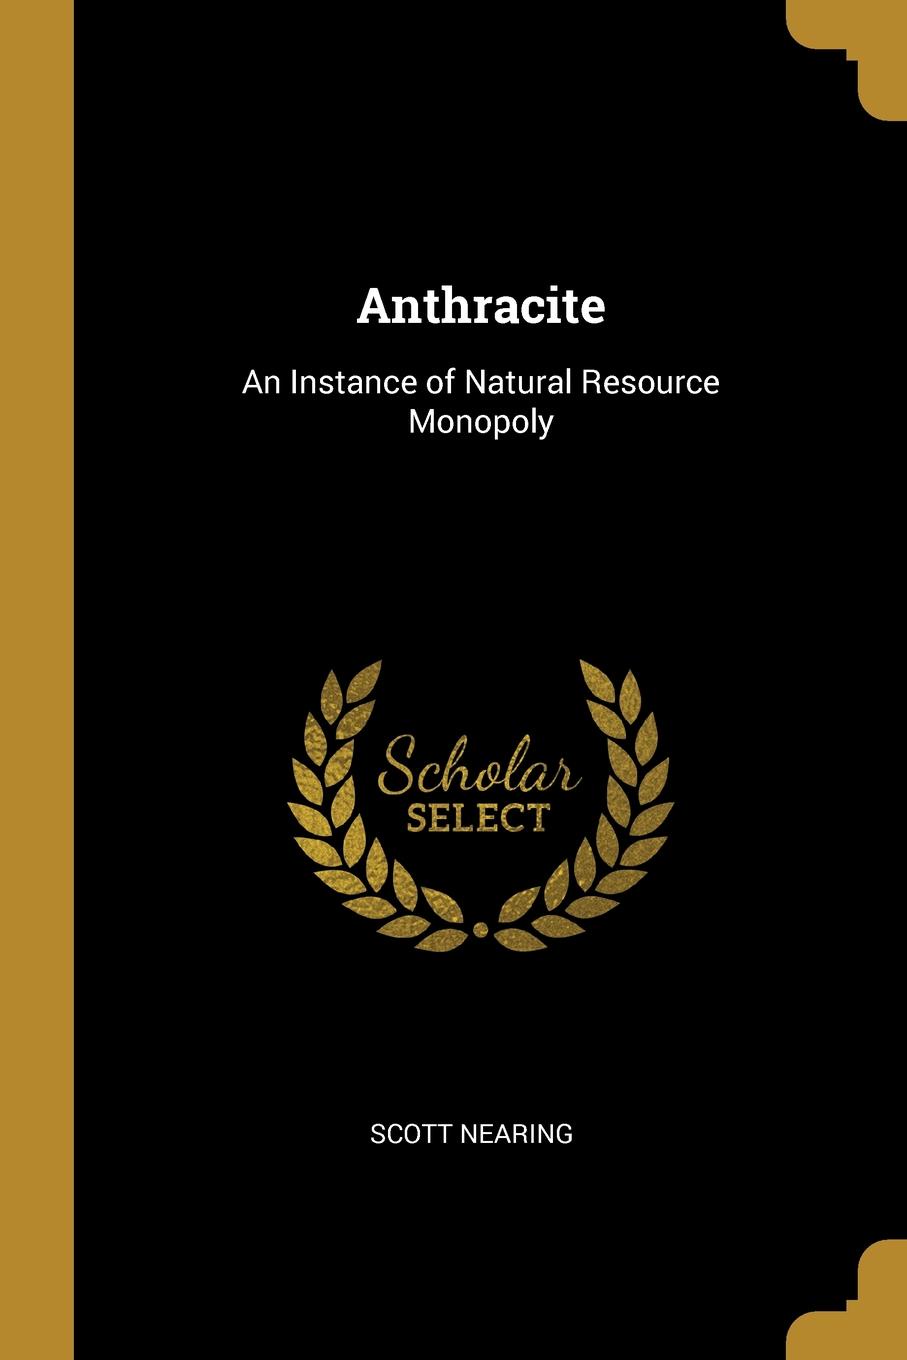 Anthracite. An Instance of Natural Resource Monopoly